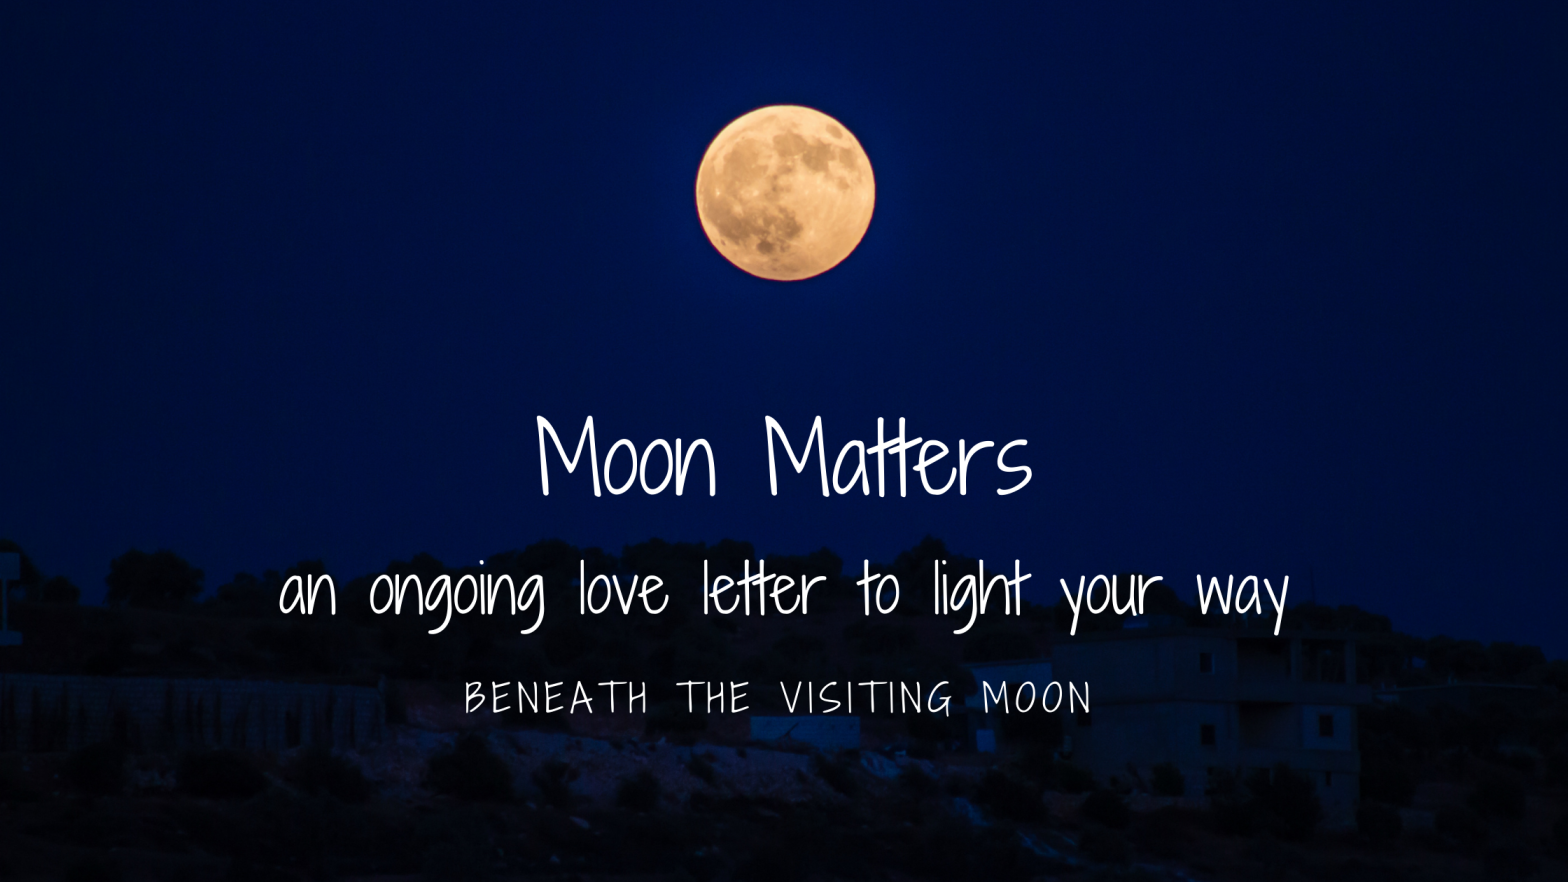 moon-matters-1-2-march-new-moon-edition-beneath-the-visiting-moon